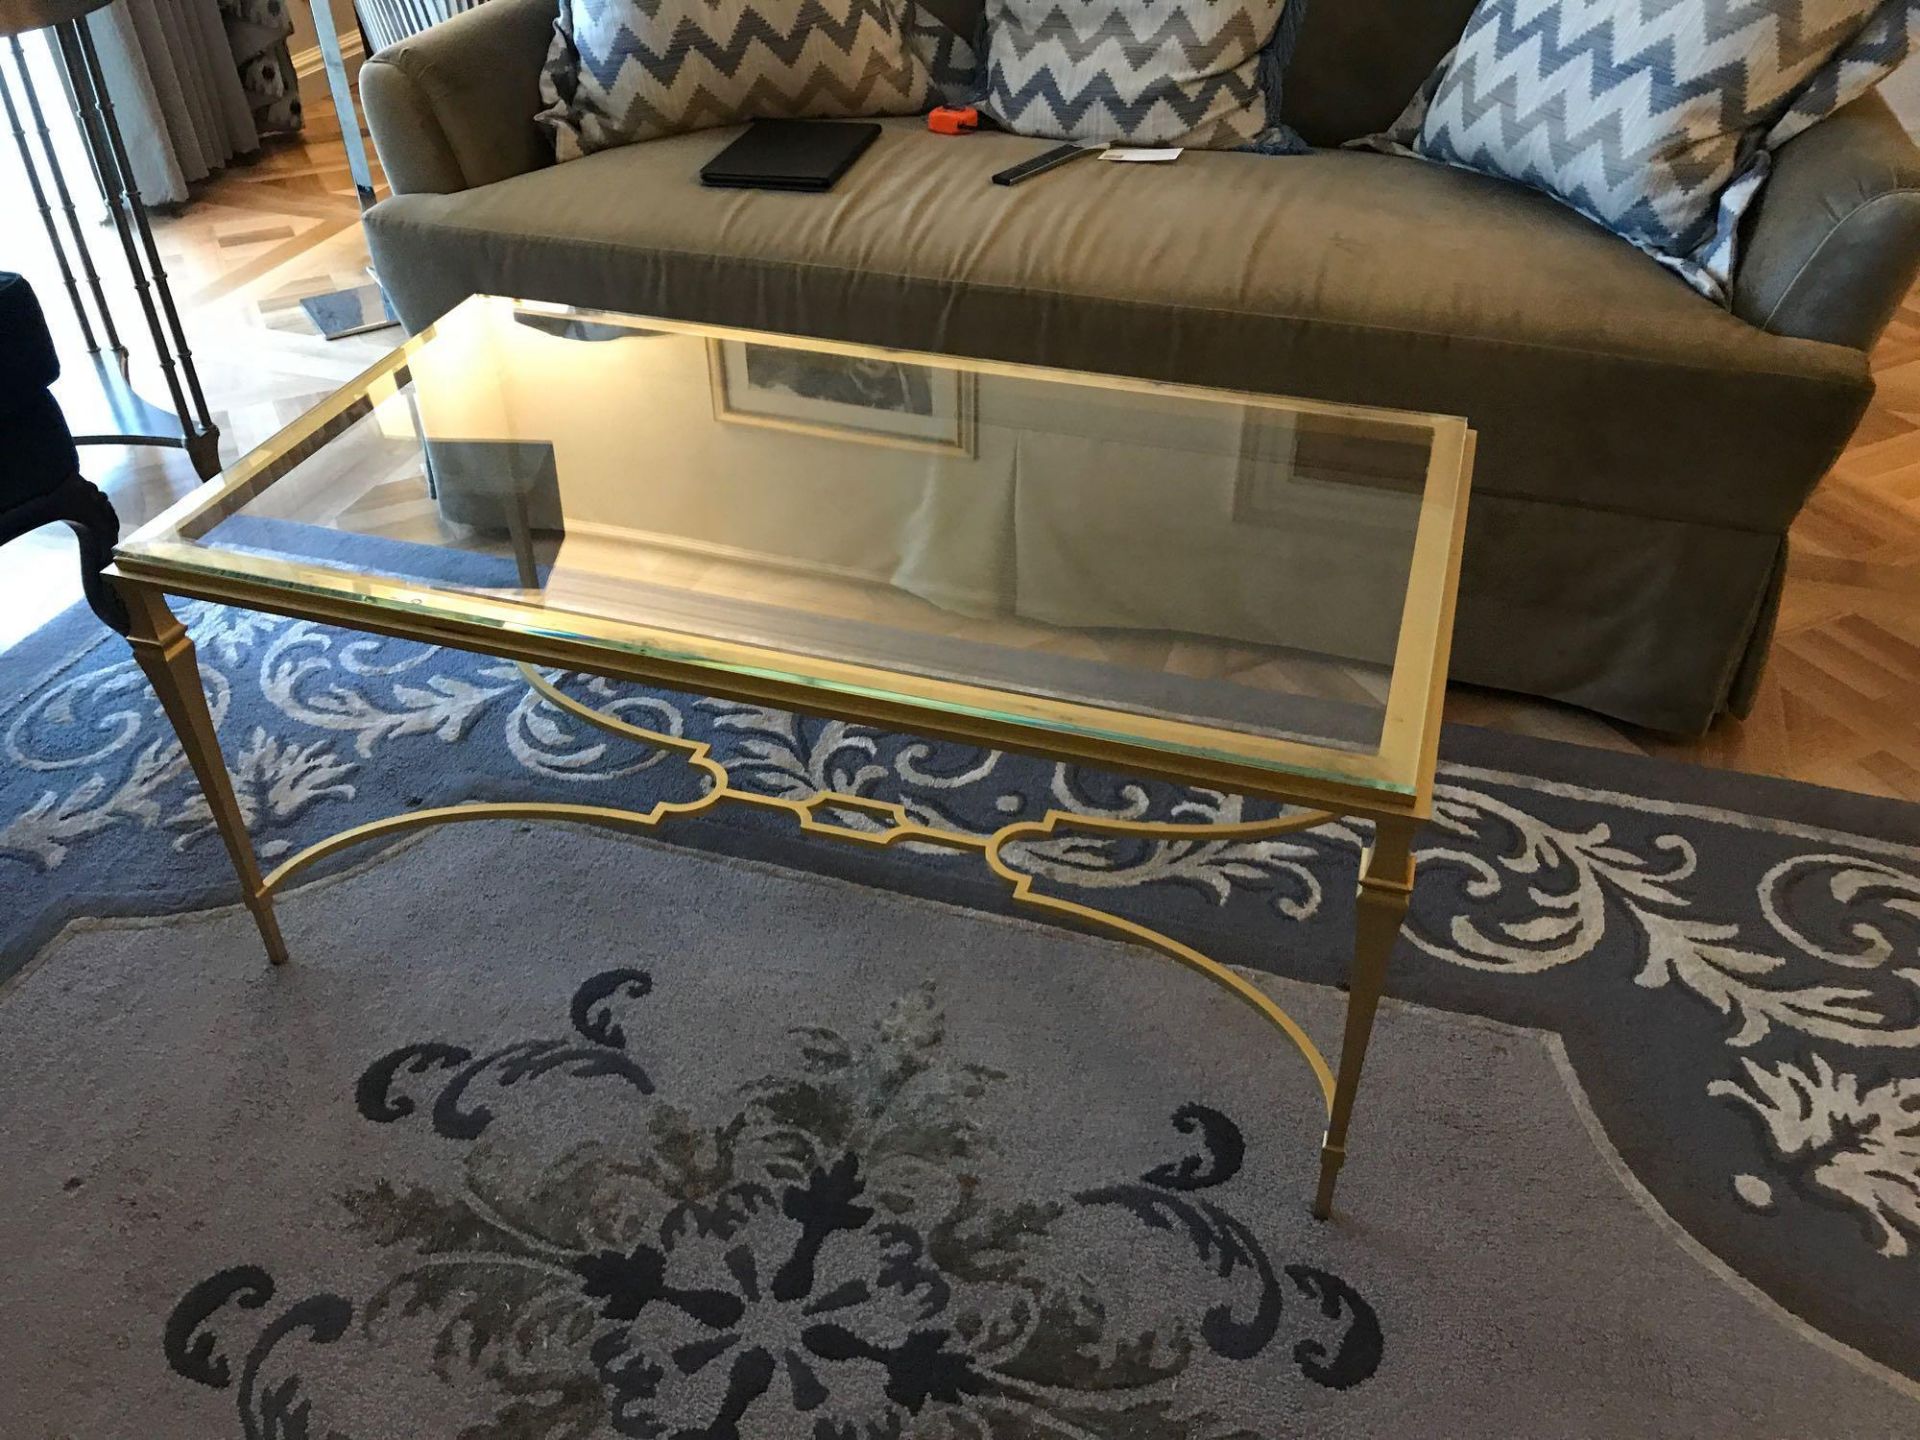 A Rectangular Coffee Table Polished Brass Frame With Clear Glass Top 110 x 60 x 58cm Room 604 - Bild 2 aus 2